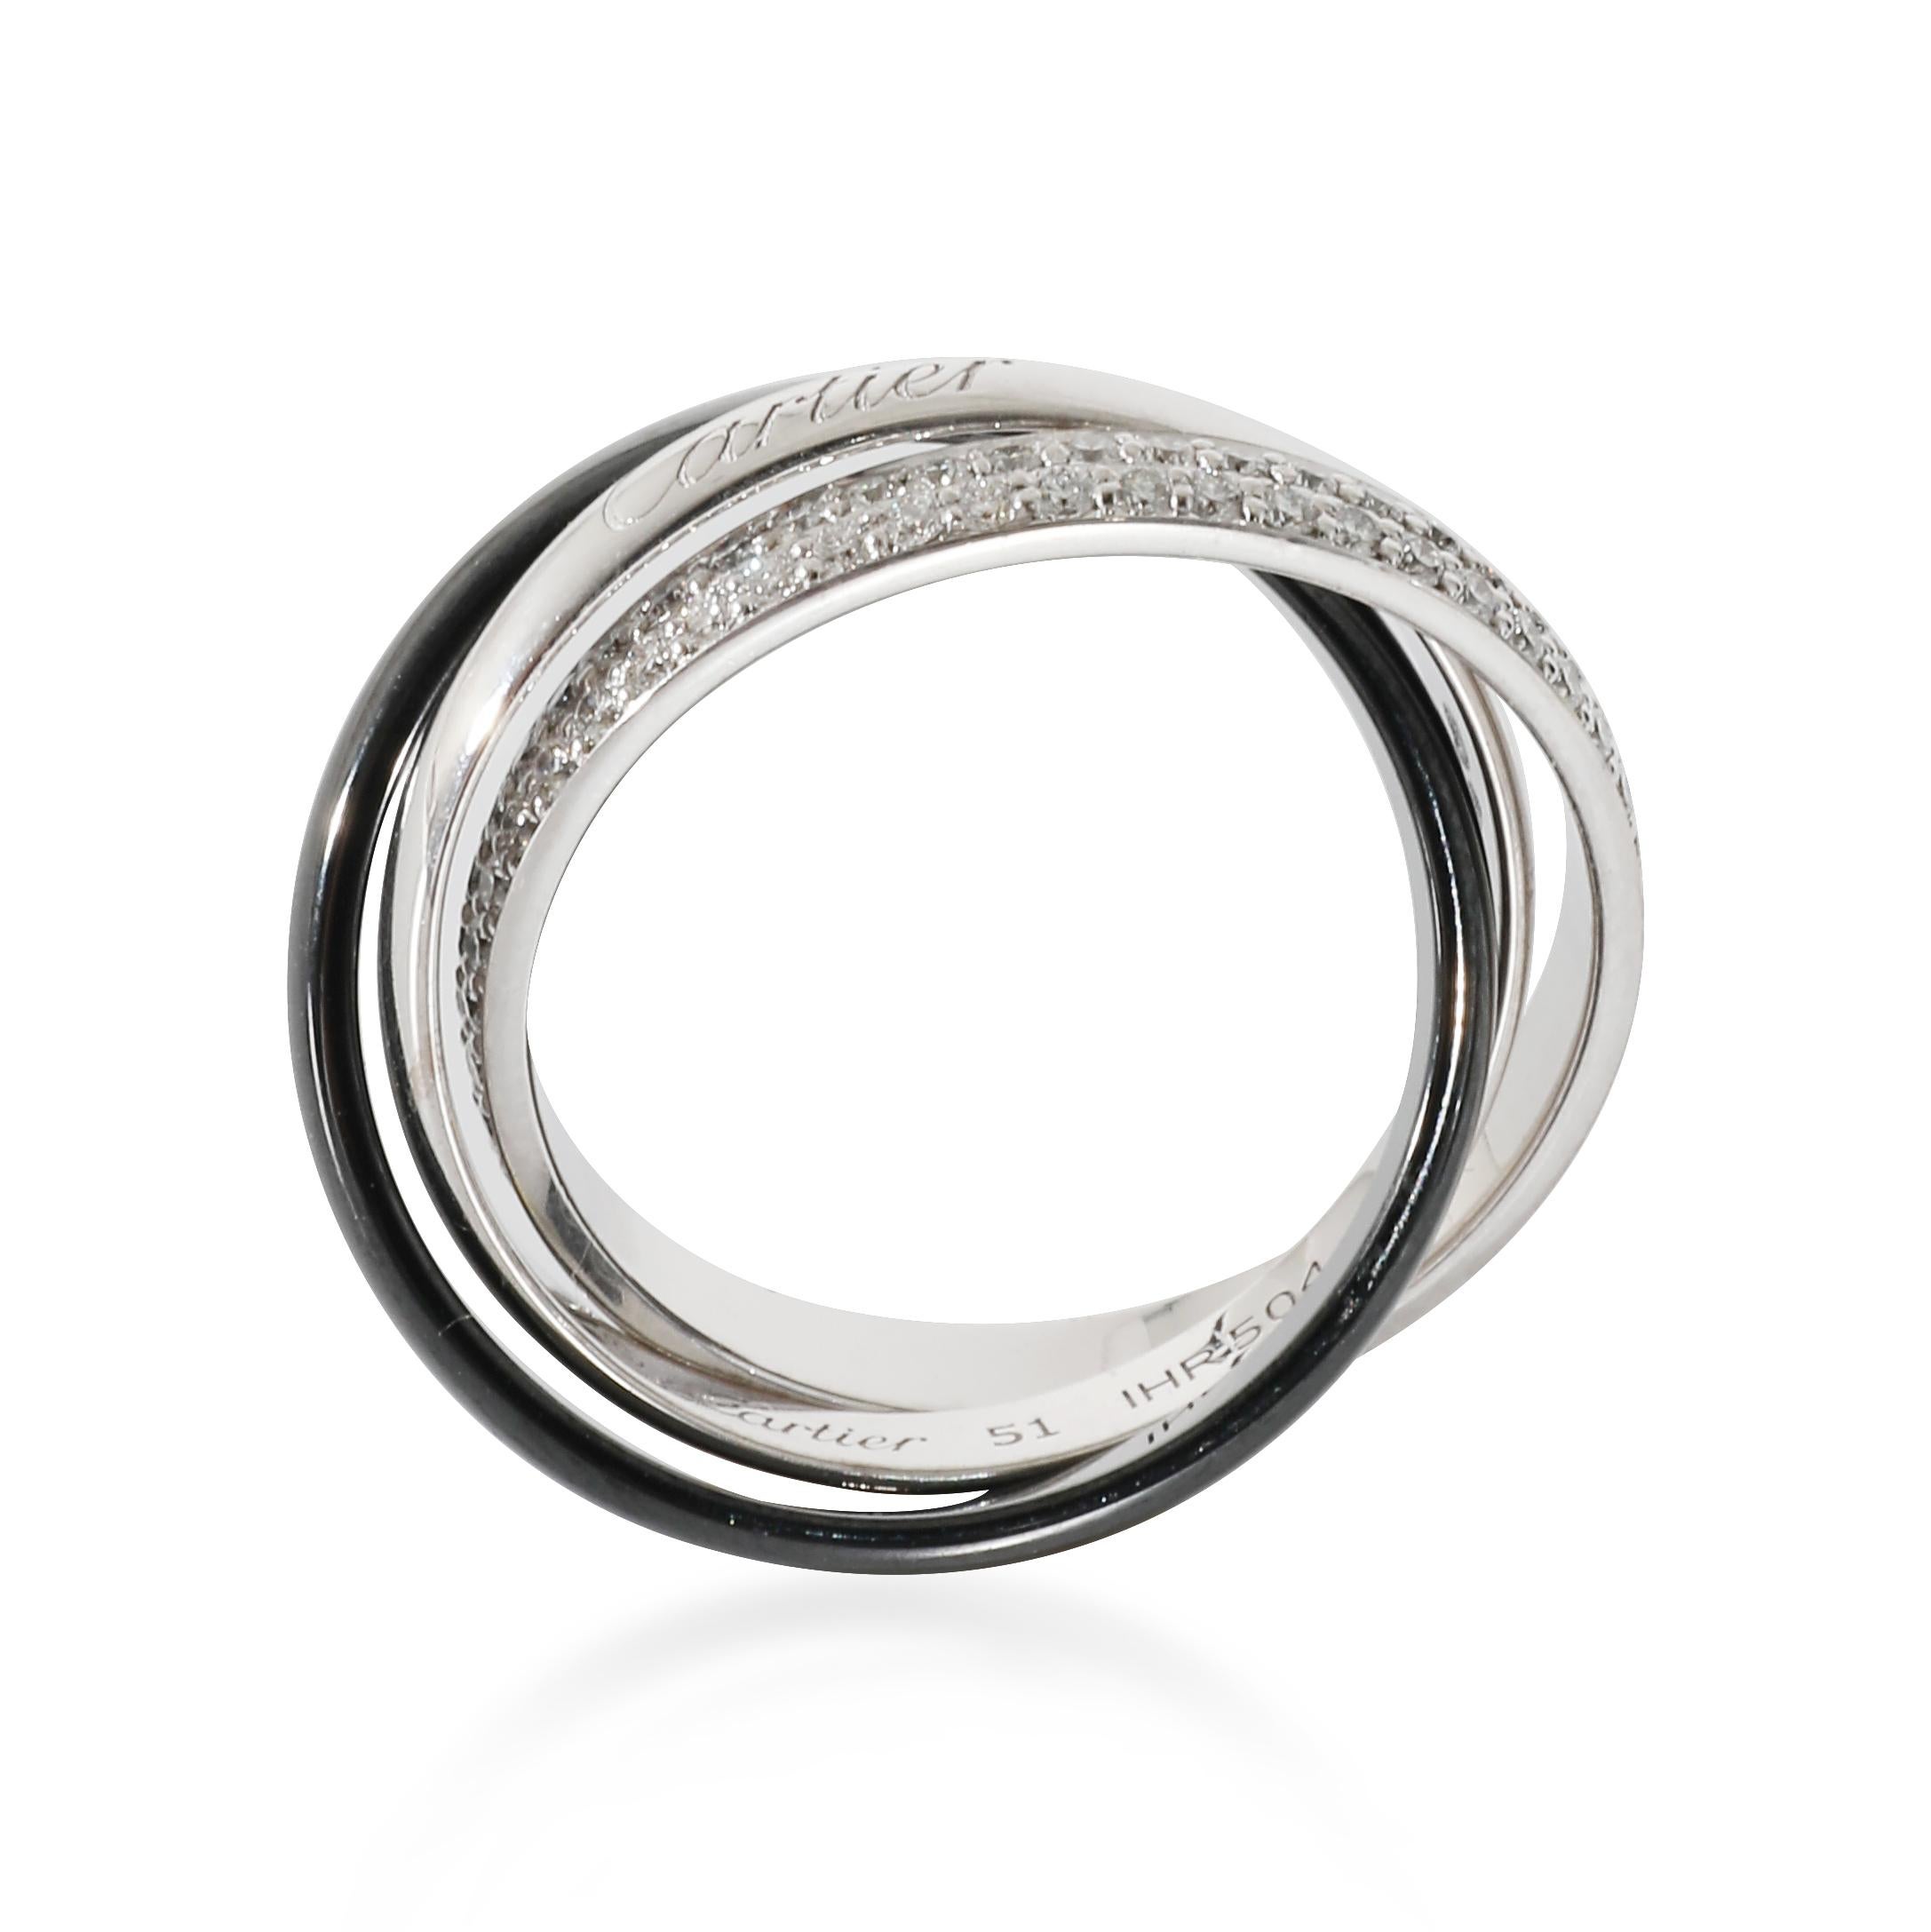 Cartier Trinity Ring with Ceramic & Diamond in 18k White Gold 0.45 CTW

PRIMARY DETAILS
SKU: 134308
Listing Title: Cartier Trinity Ring with Ceramic & Diamond in 18k White Gold 0.45 CTW
Condition Description: Louis Cartier, the founder's grandson,